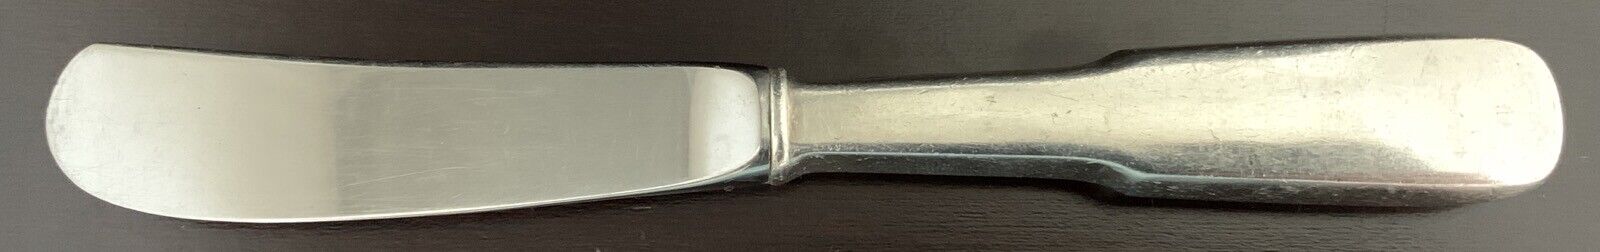 International Sterling Flatware, 1810,  Butter Knife, 5 3/4 inches